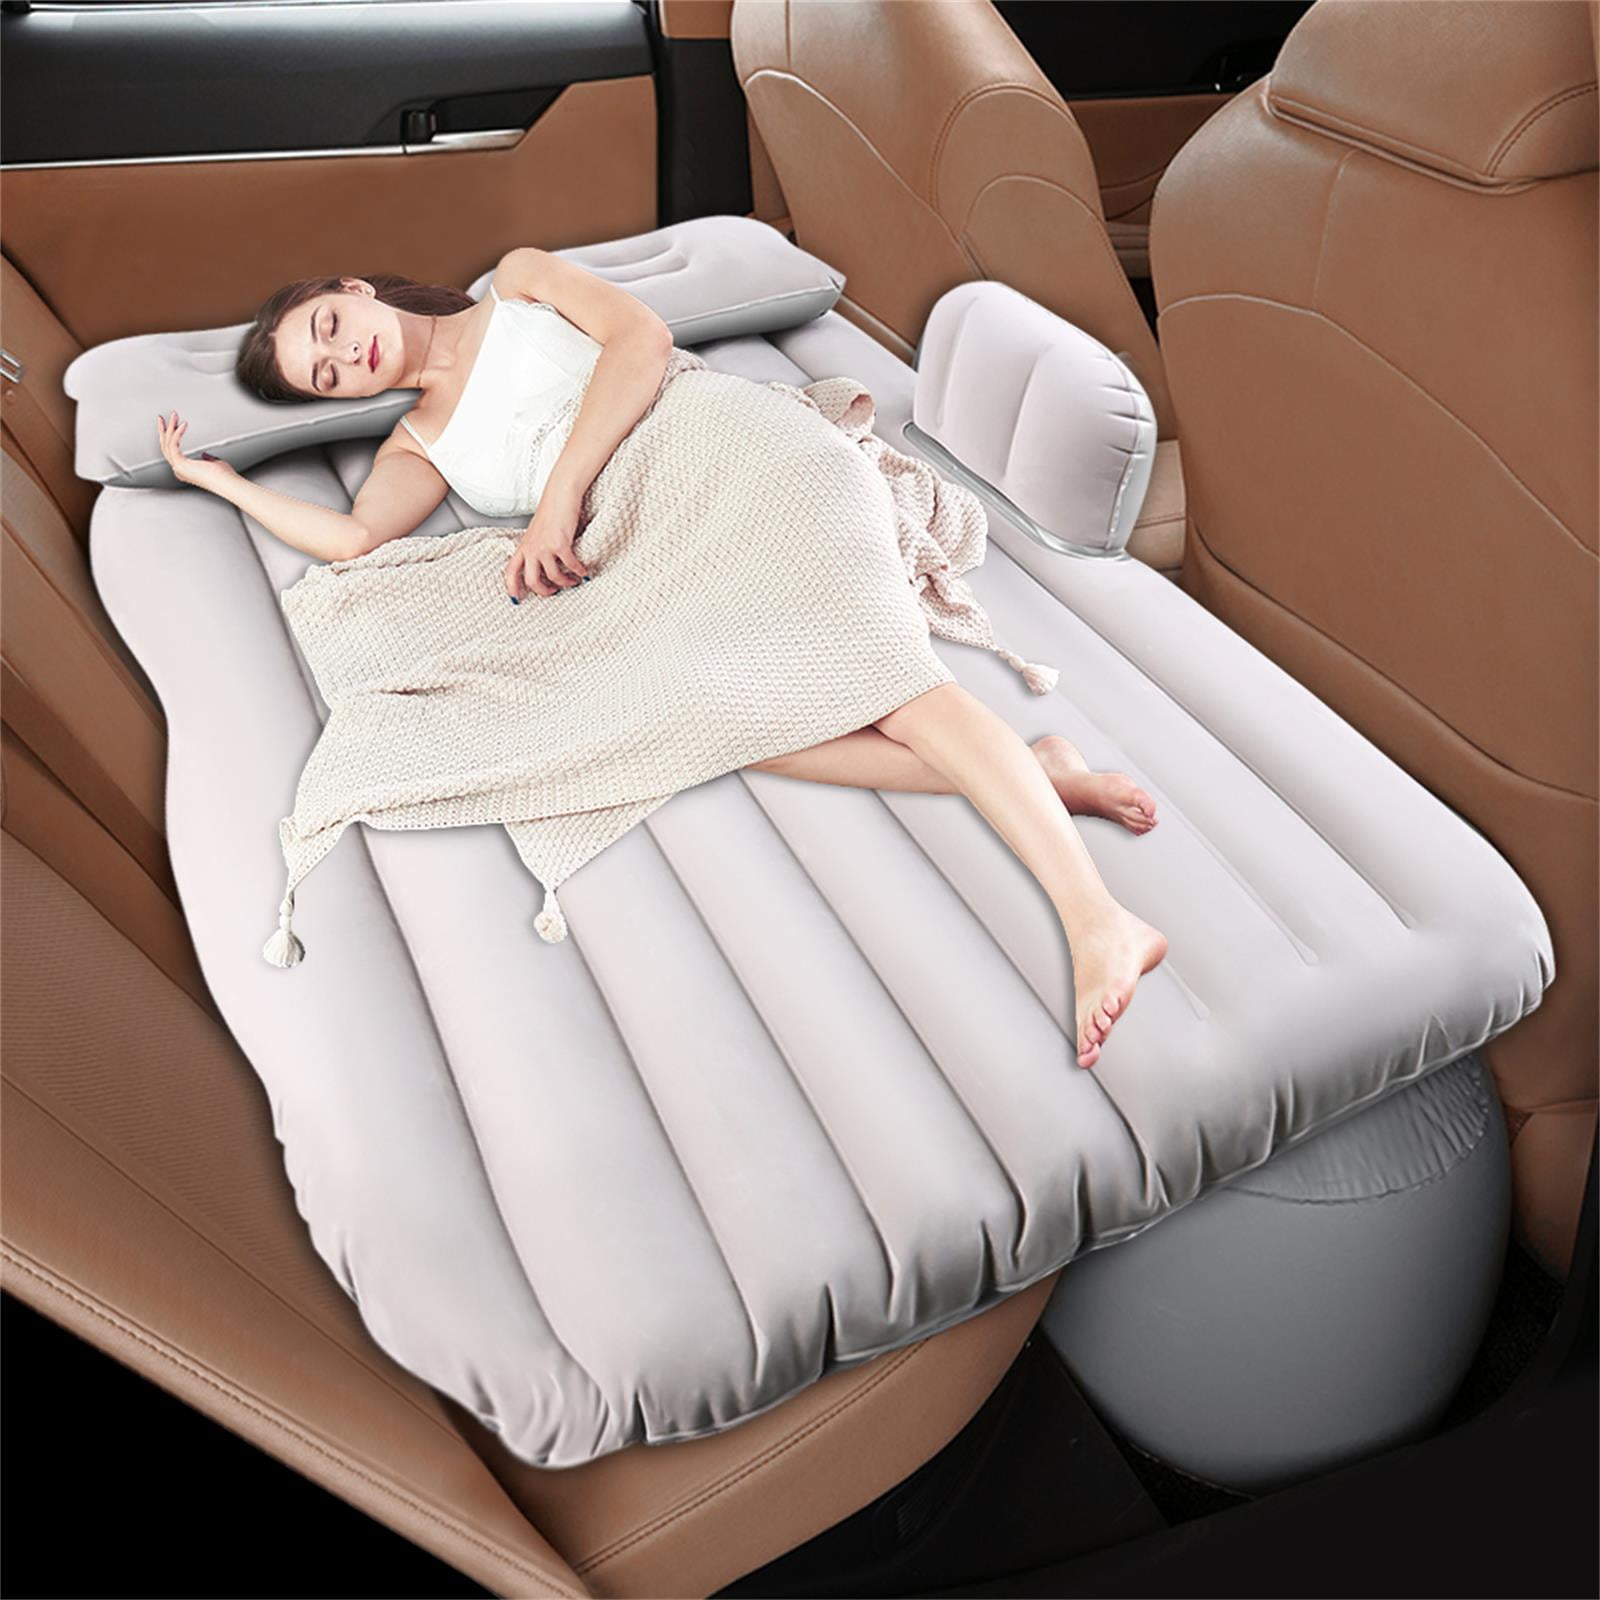 Car Inflatable Bed Back Seat Mattress Travel Airbed for Rest Sleep Camping gift 